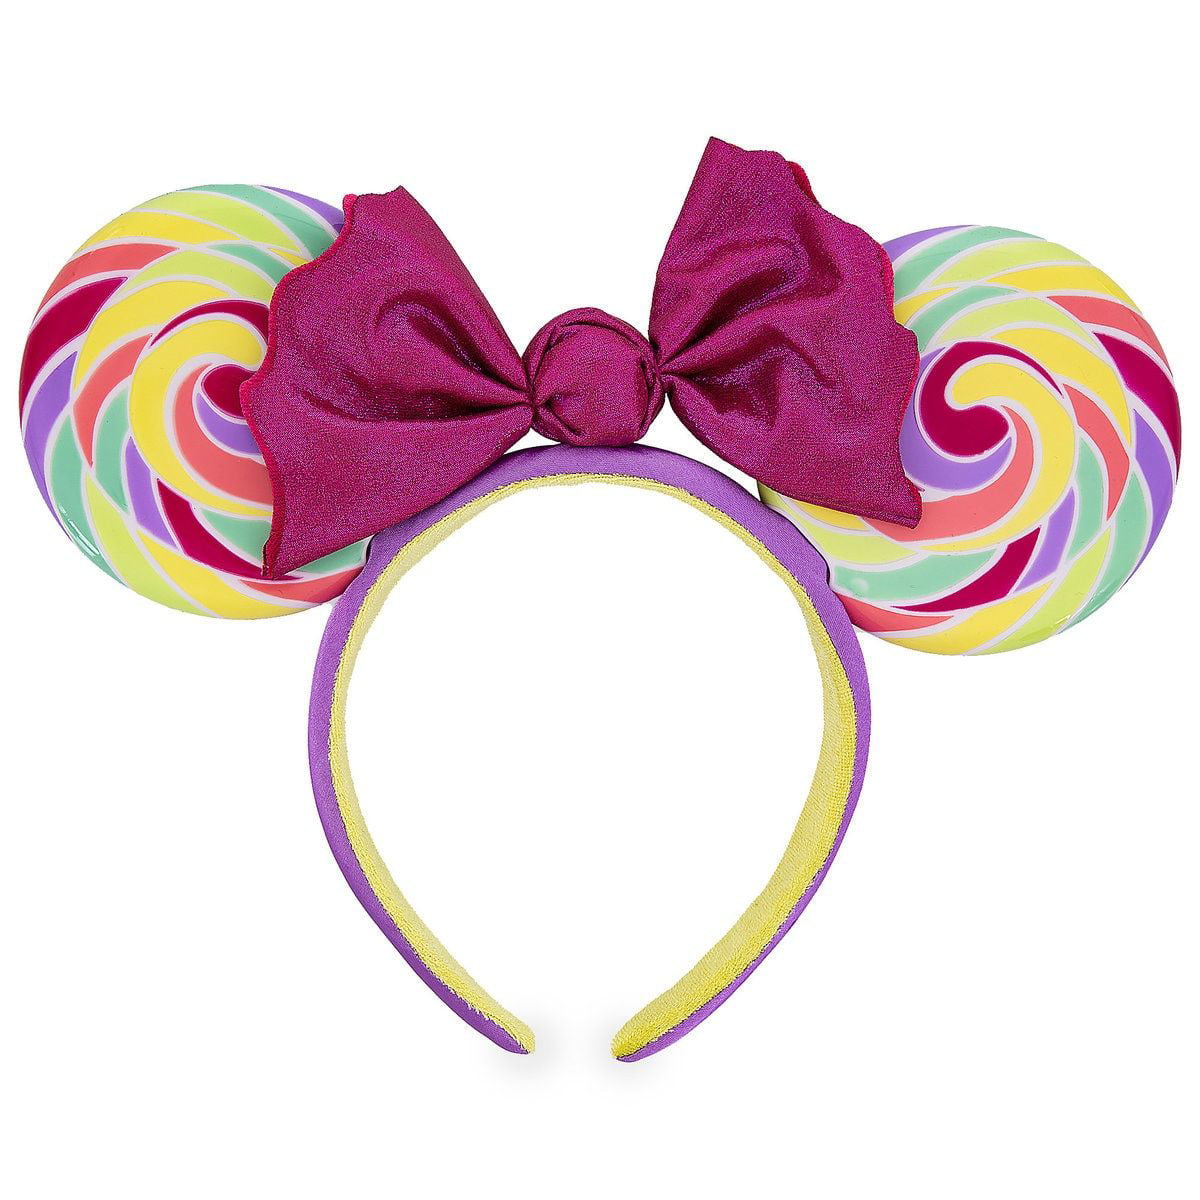 New Disney Parks Minnie Mouse Ears Headband Festival Costume Party Cosplay 